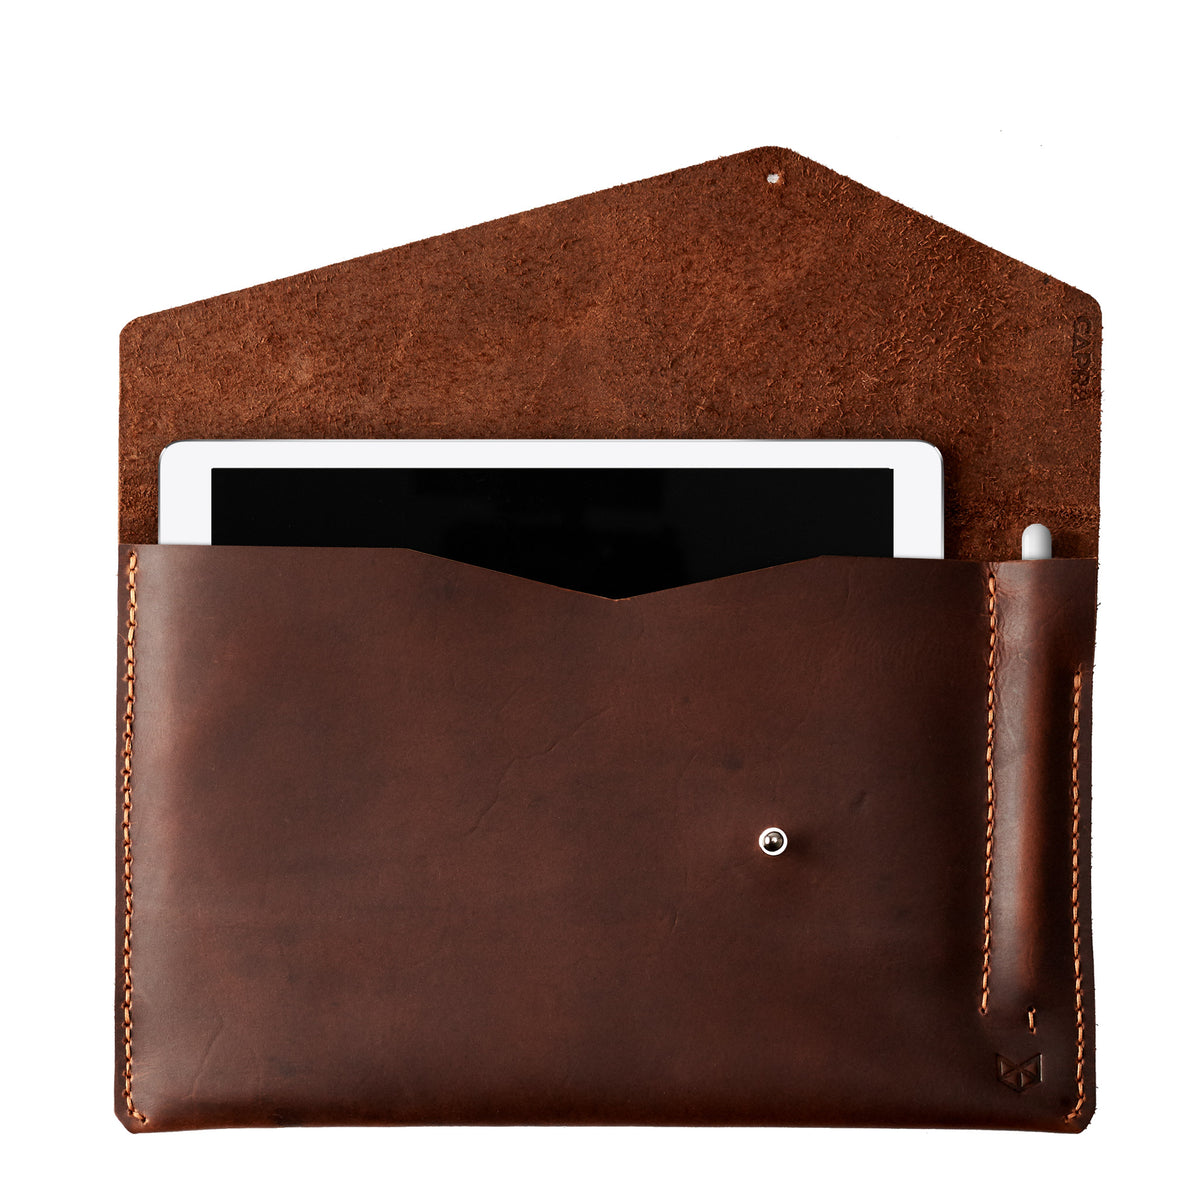 Tan leather sleeve for ASUS Zenbook Pro Duo. Mens gifts